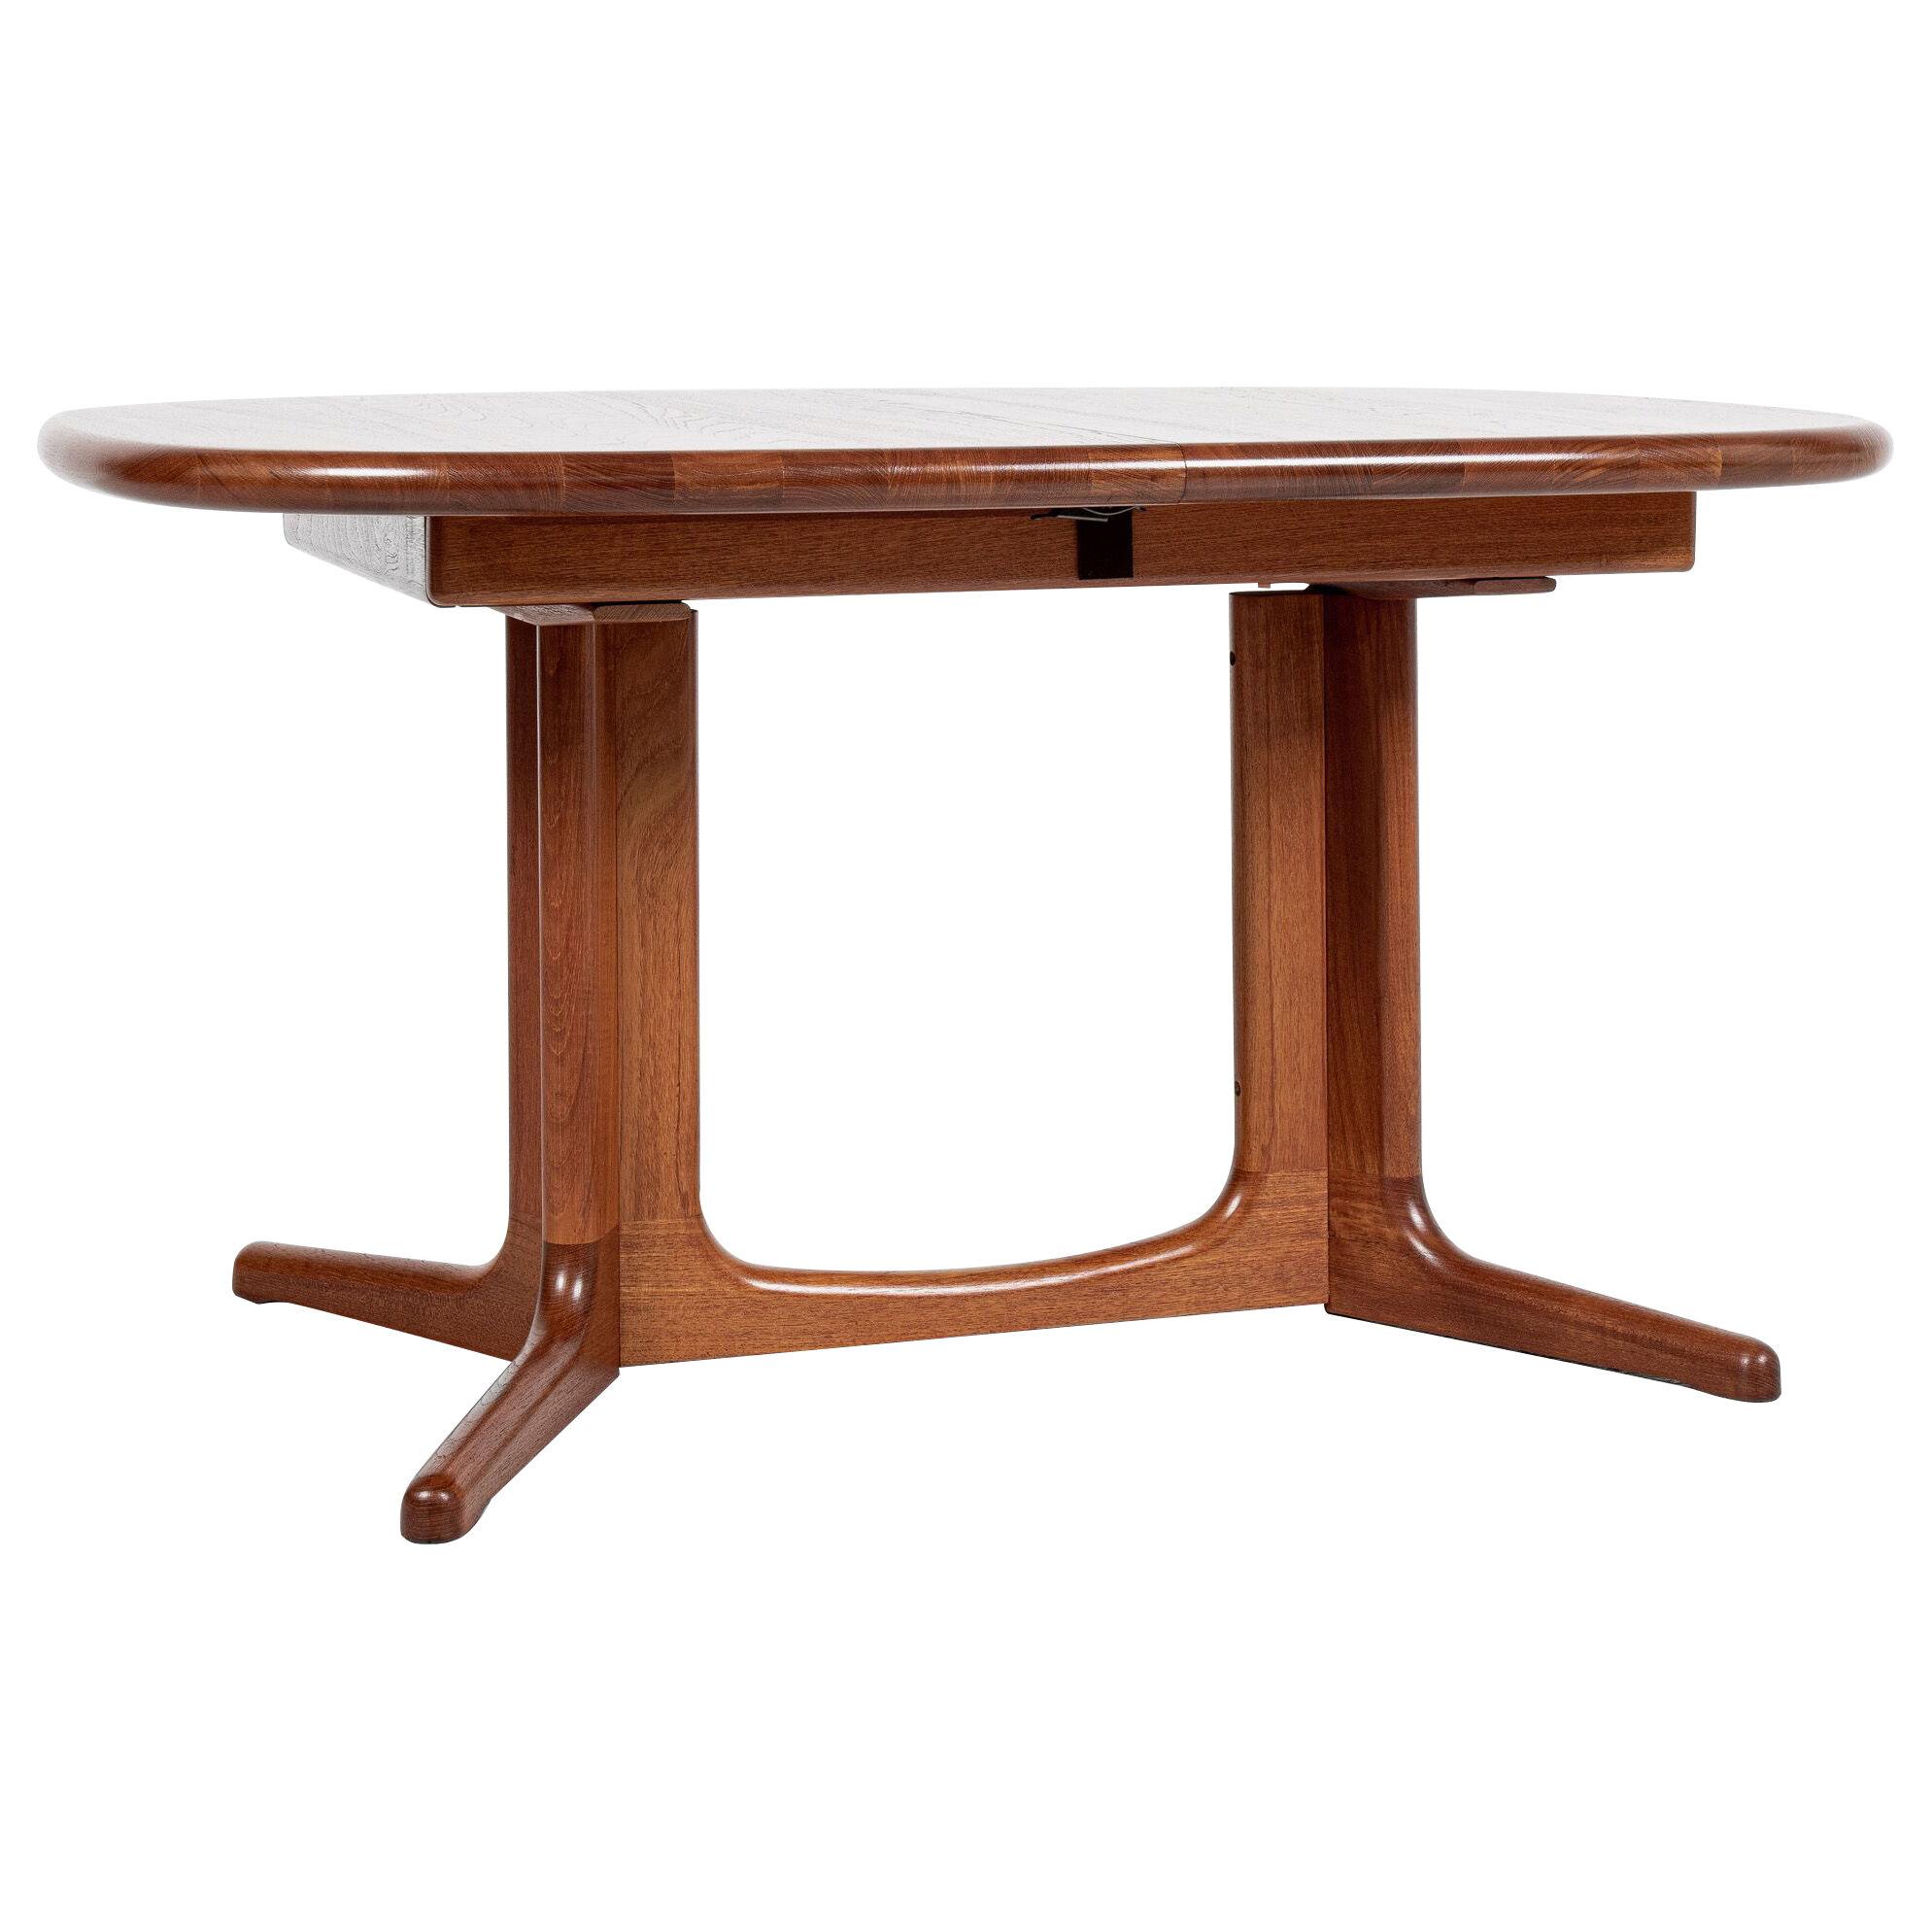 Midcentury Danish extendable oval dining table in teak by Glostrup 1960s